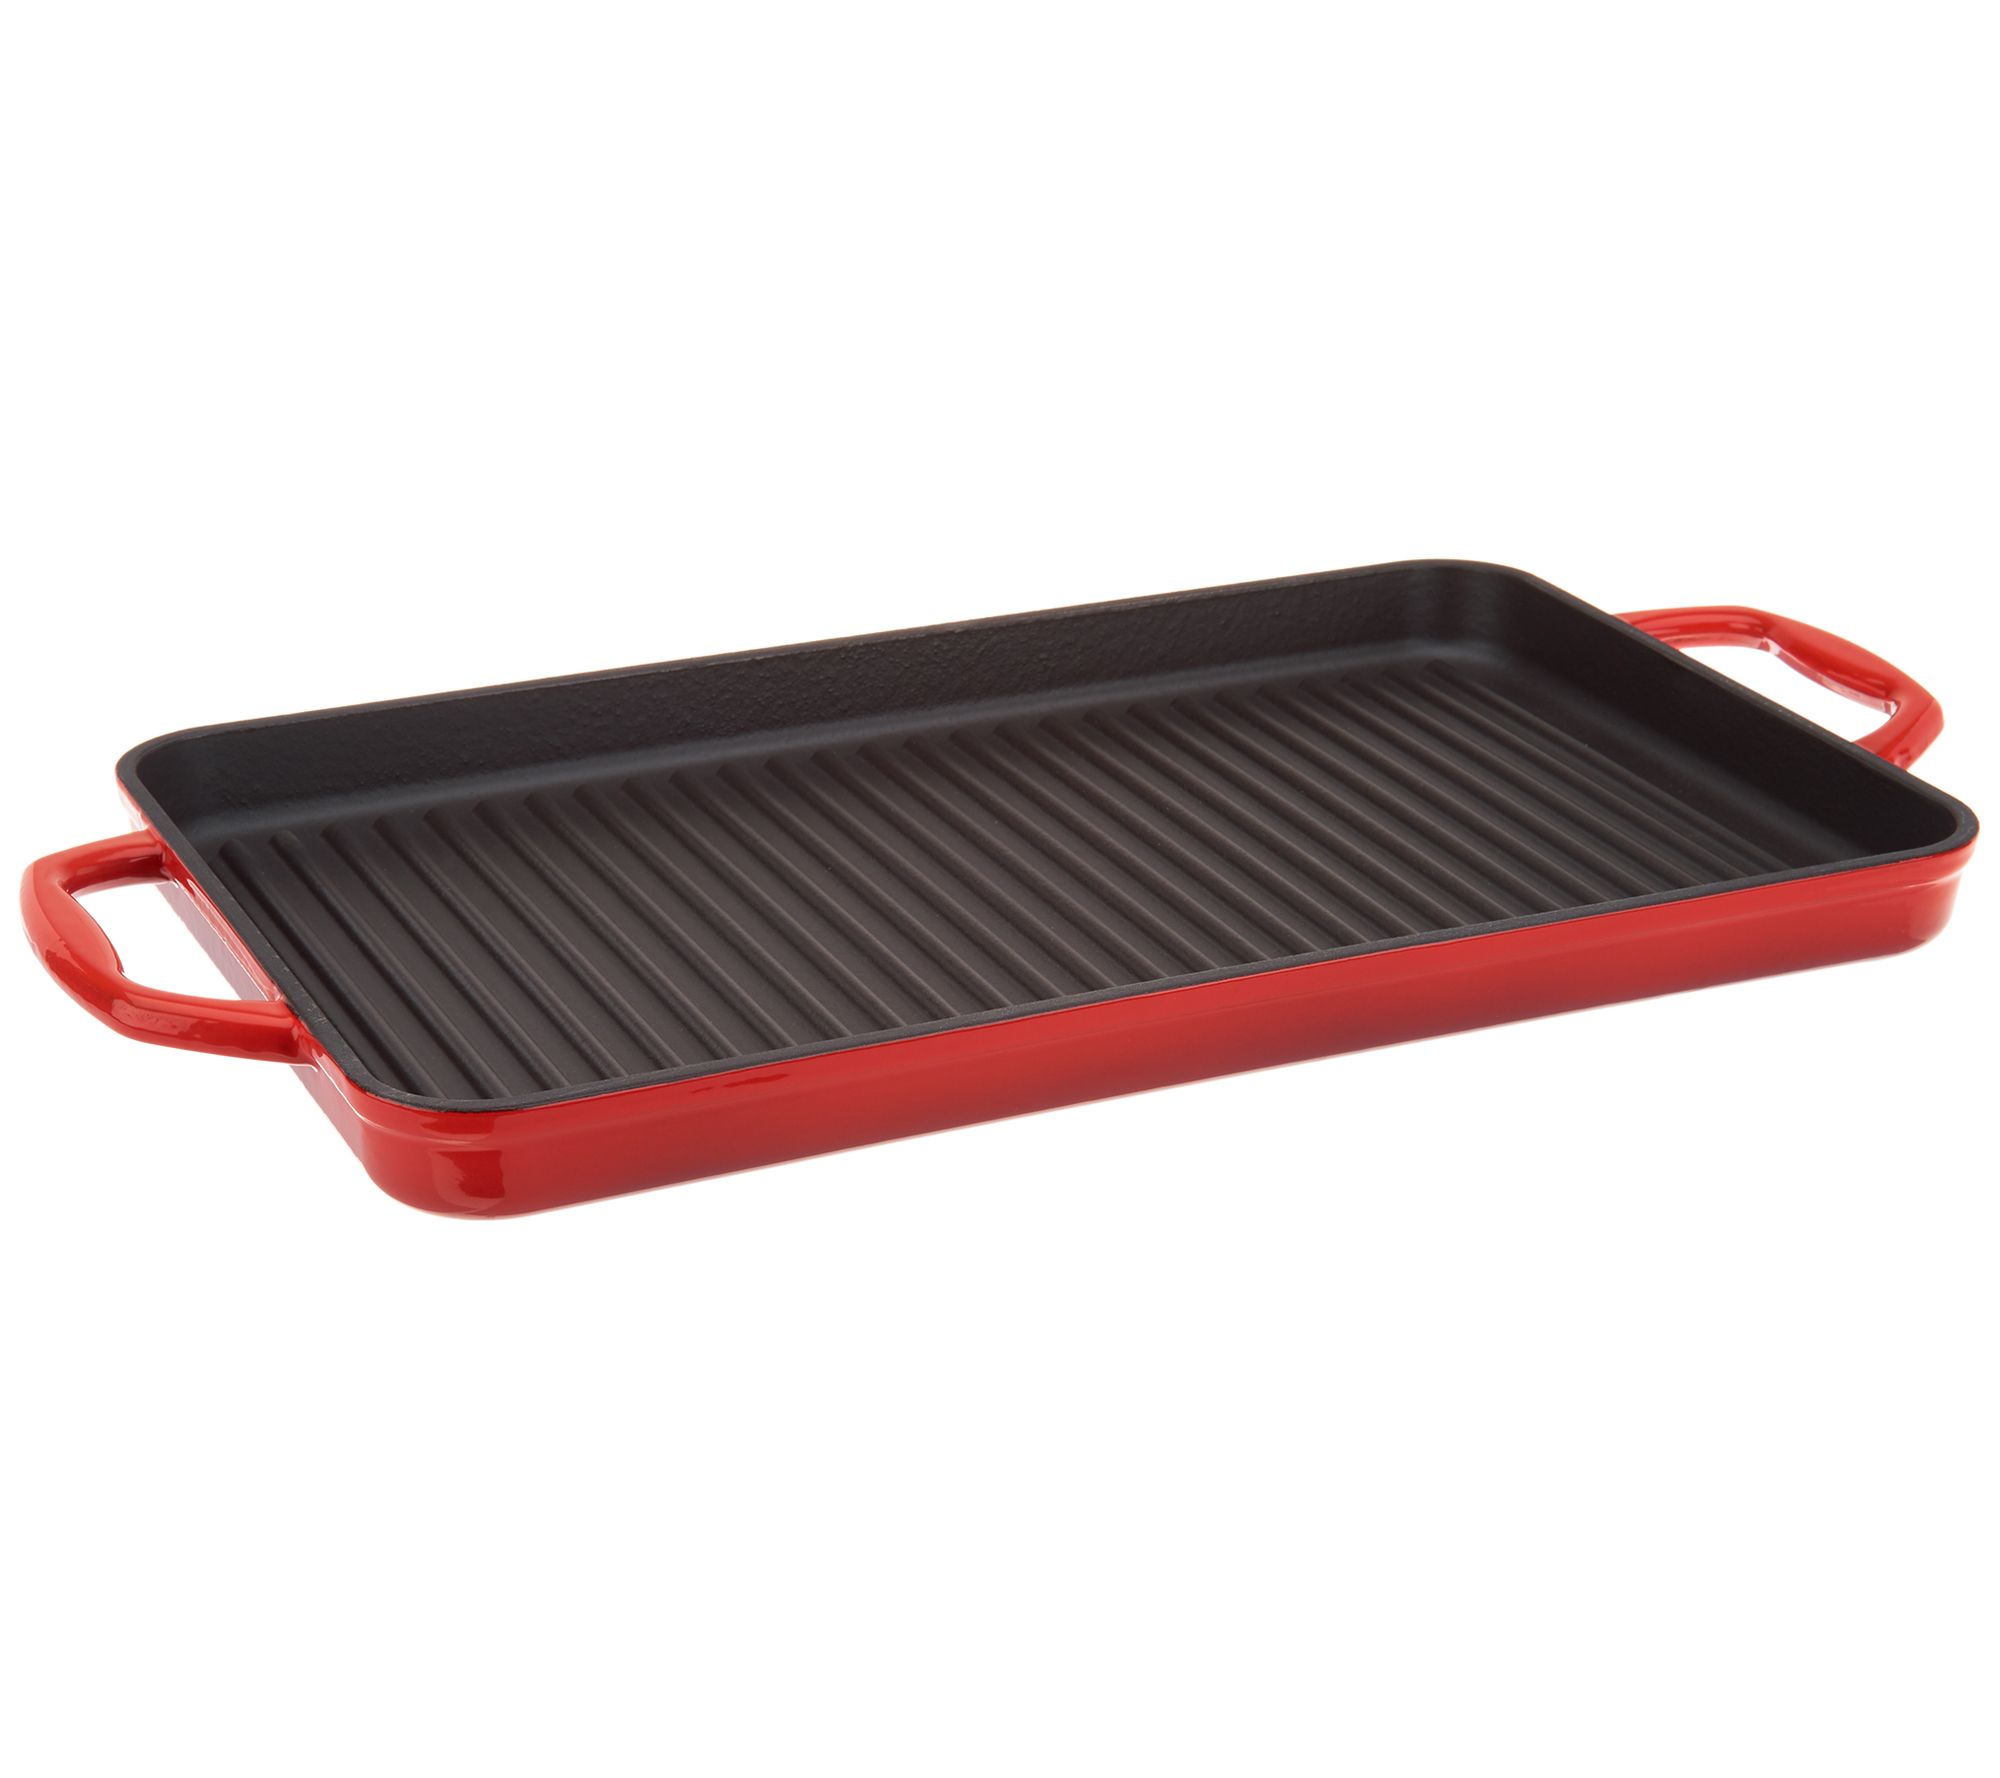 NutriChef Cast Iron Reversible Grill Plate - 18 Inch Flat Cast